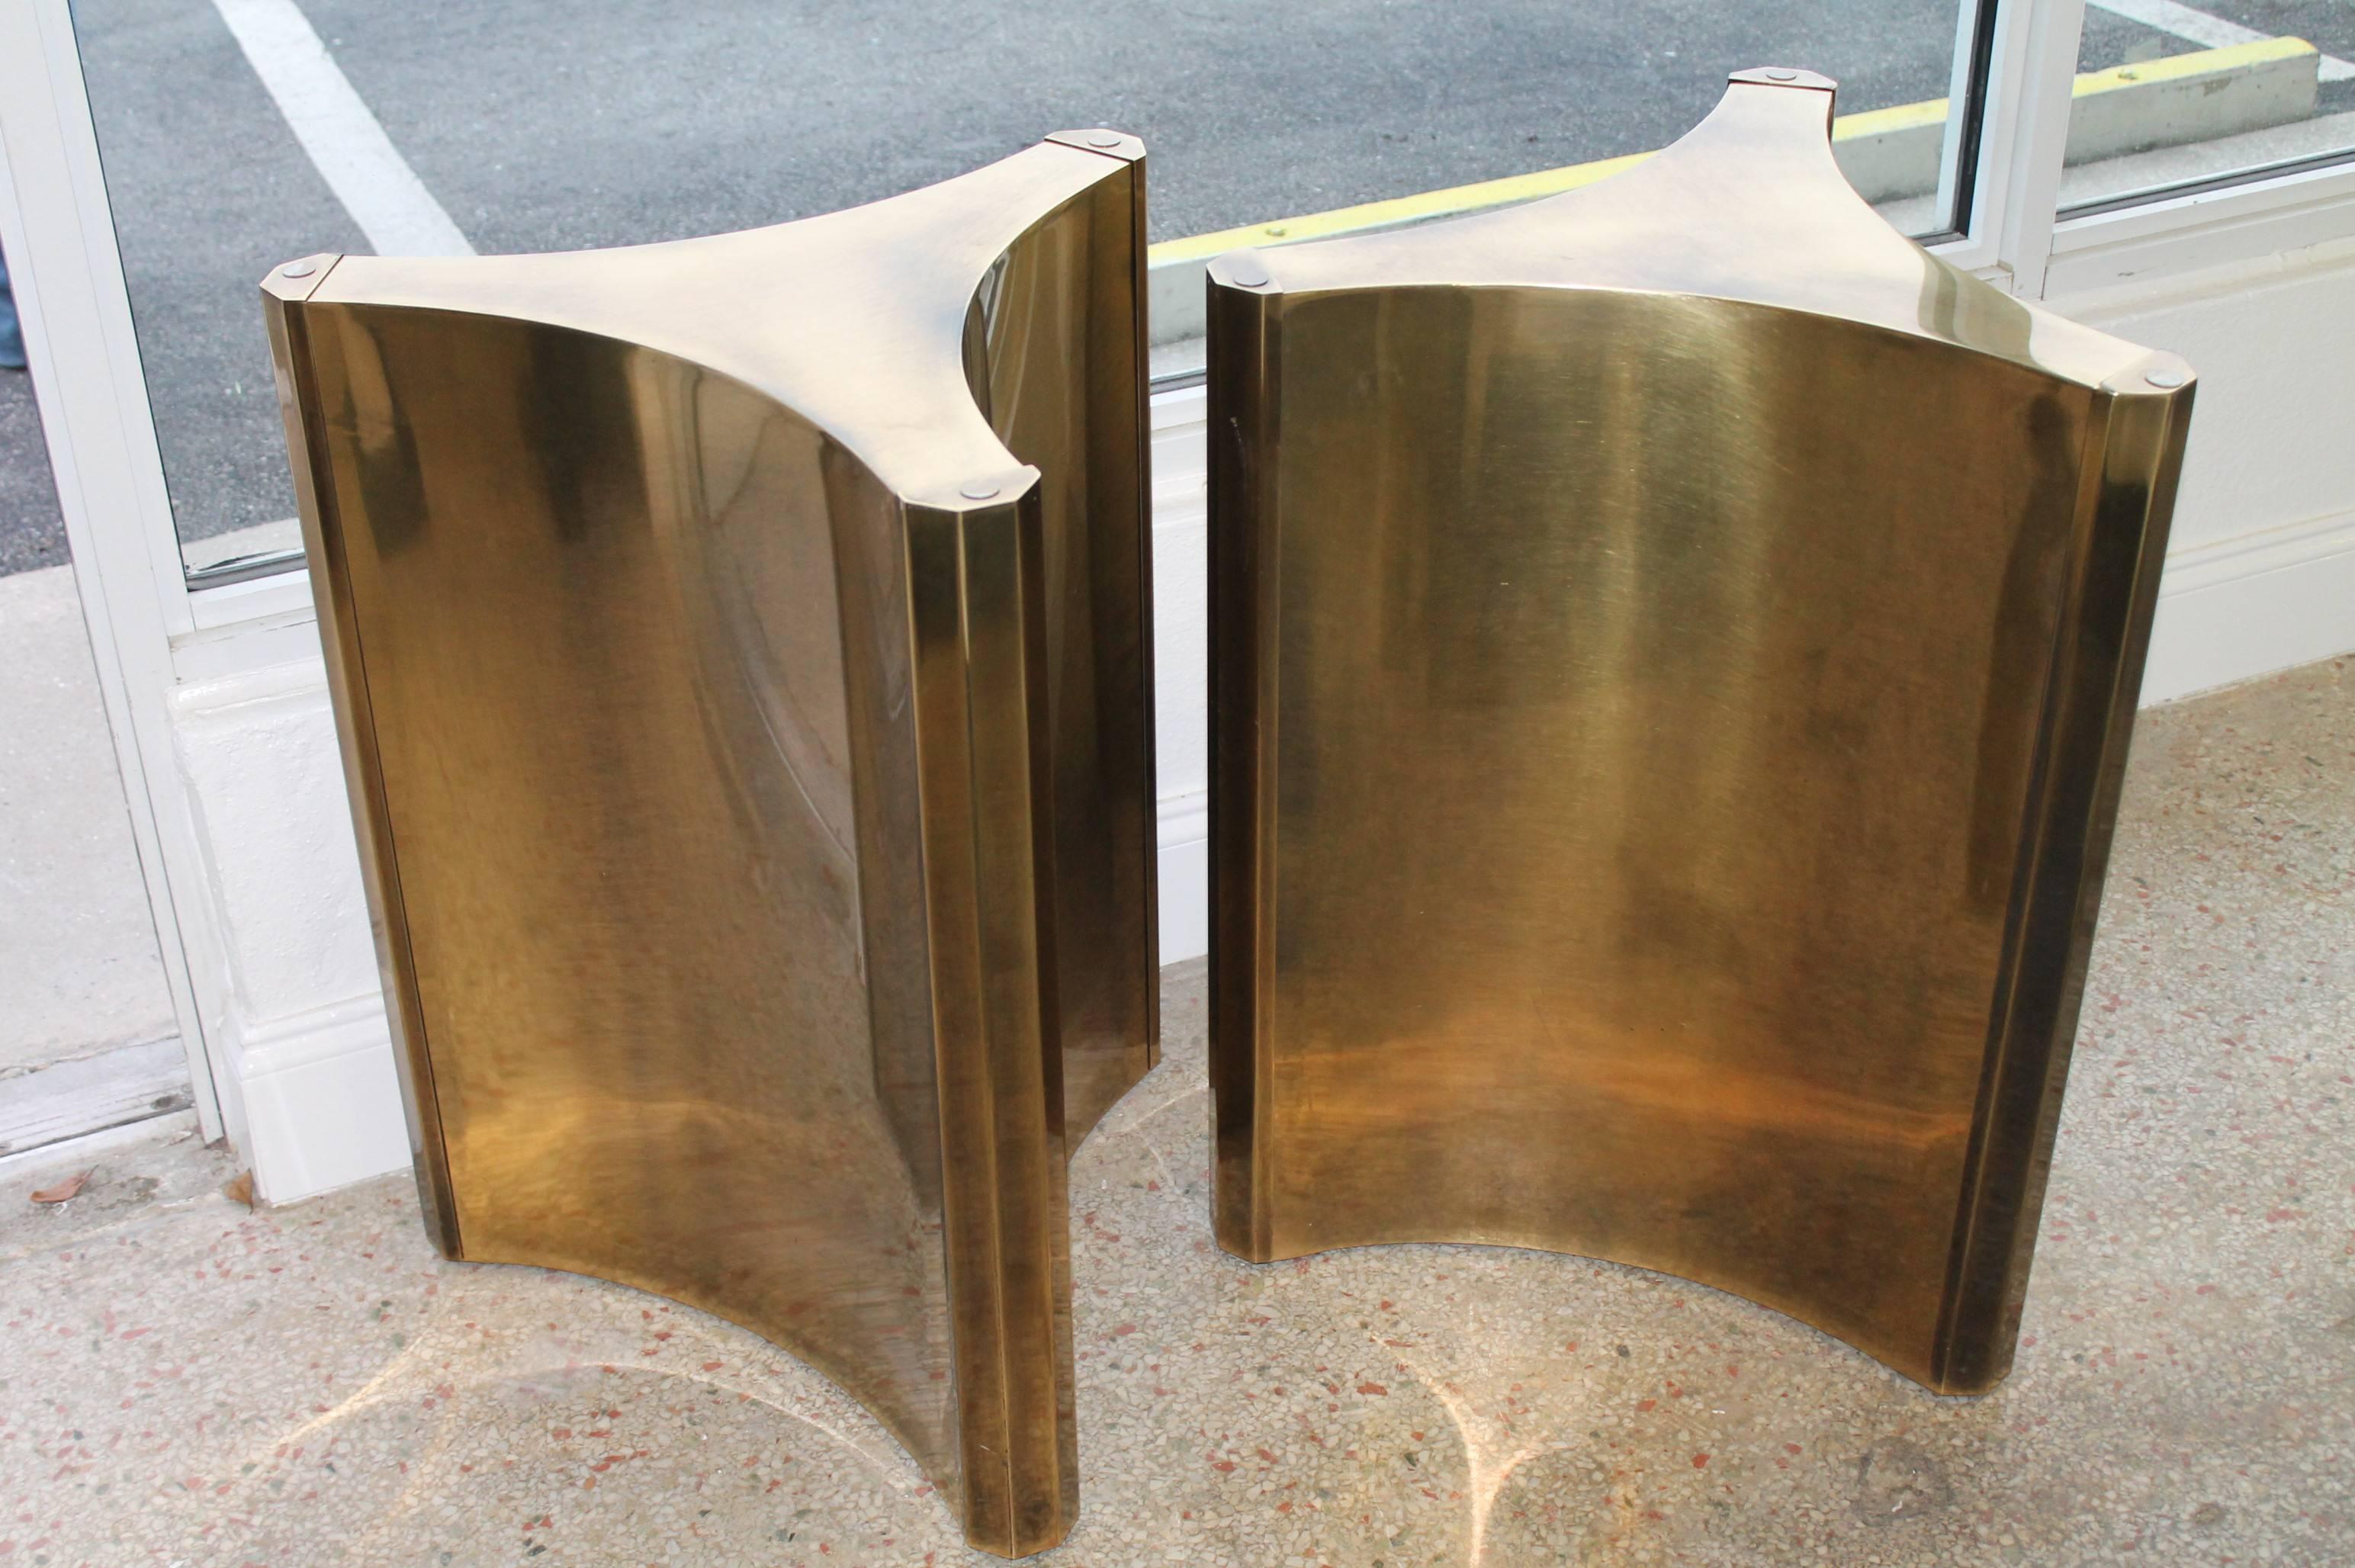 Vintage Pair of Brass Mastercraft Pesestal Trefoil Bases. These can be used as a dining table, desk or console table. Glass top not included. 

Hollywood Regency, Mid Century Modern Style.